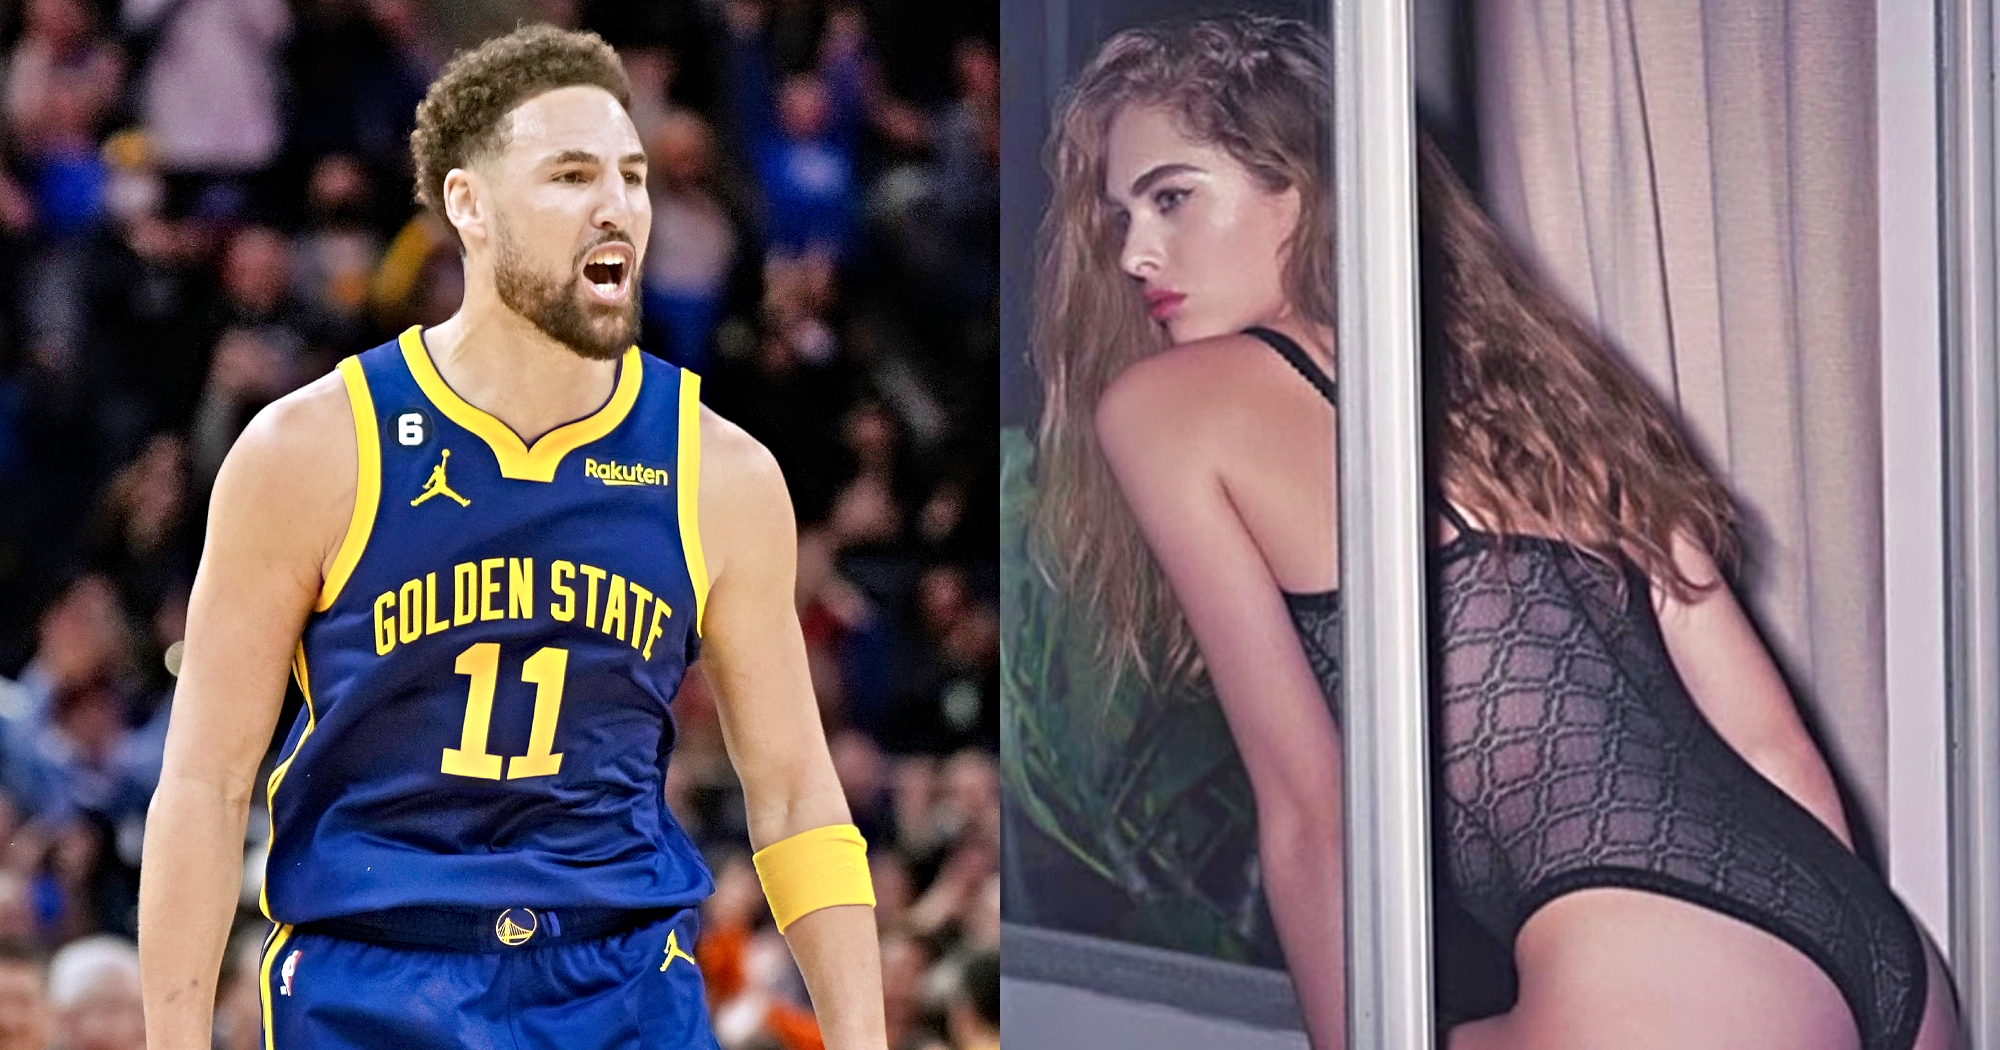 Instagram Model Shares Photos From Klay Thompson's Bedroom